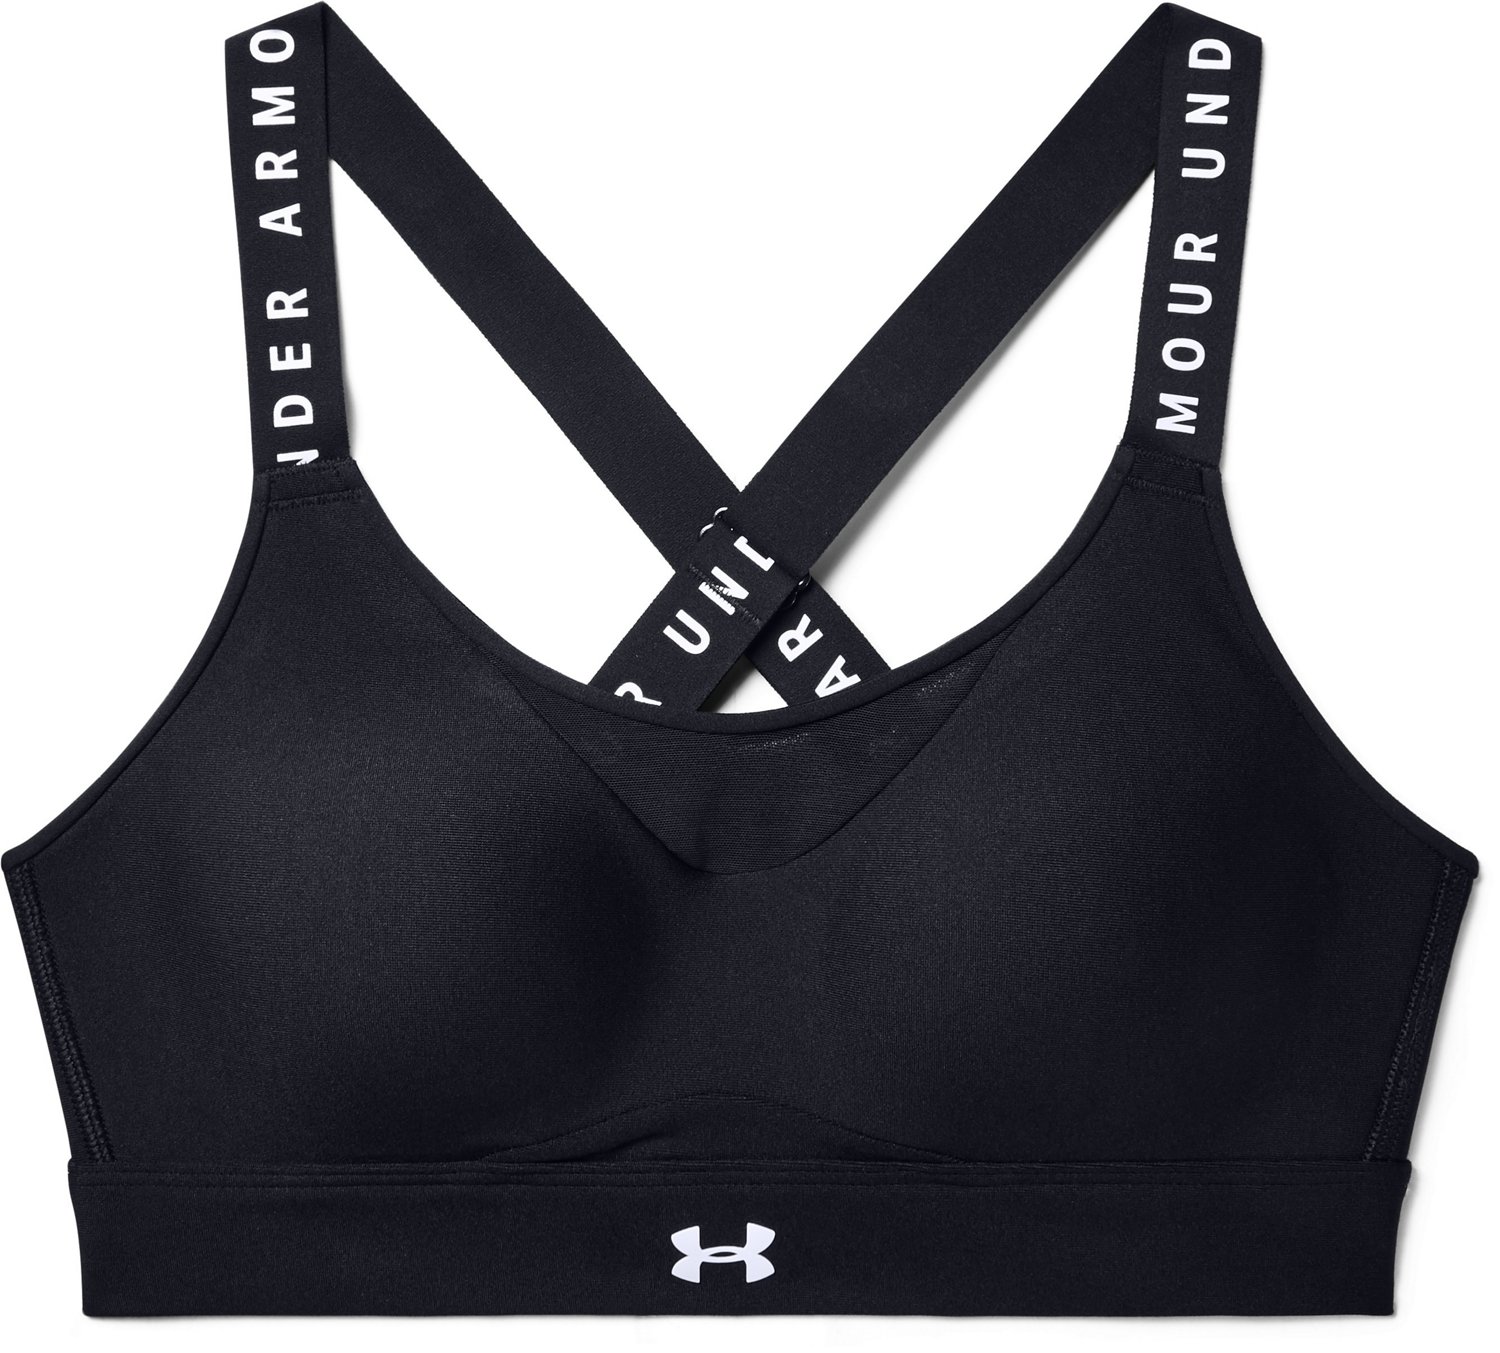 Under Armour Womens Infinity High Crossover Sports Bra